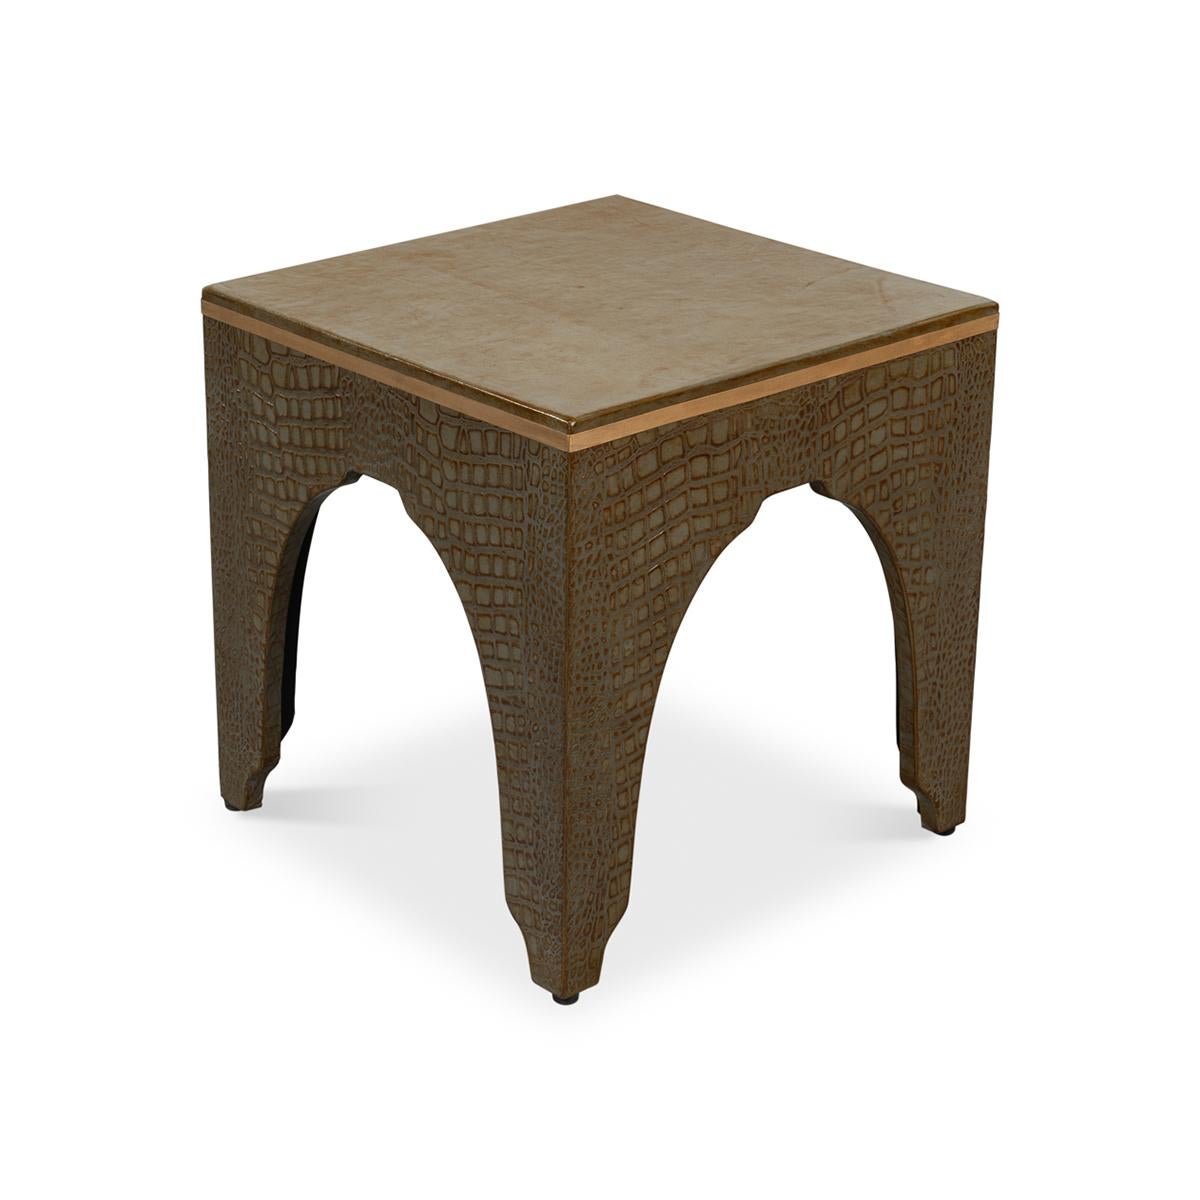 A testament to timeless elegance and luxury. Wrapped in sumptuous leather with a green embossed croc finish, this dark antique green stool exudes a refined charm that elevates any interior space.

Its sophisticated design, reflecting the grandeur of